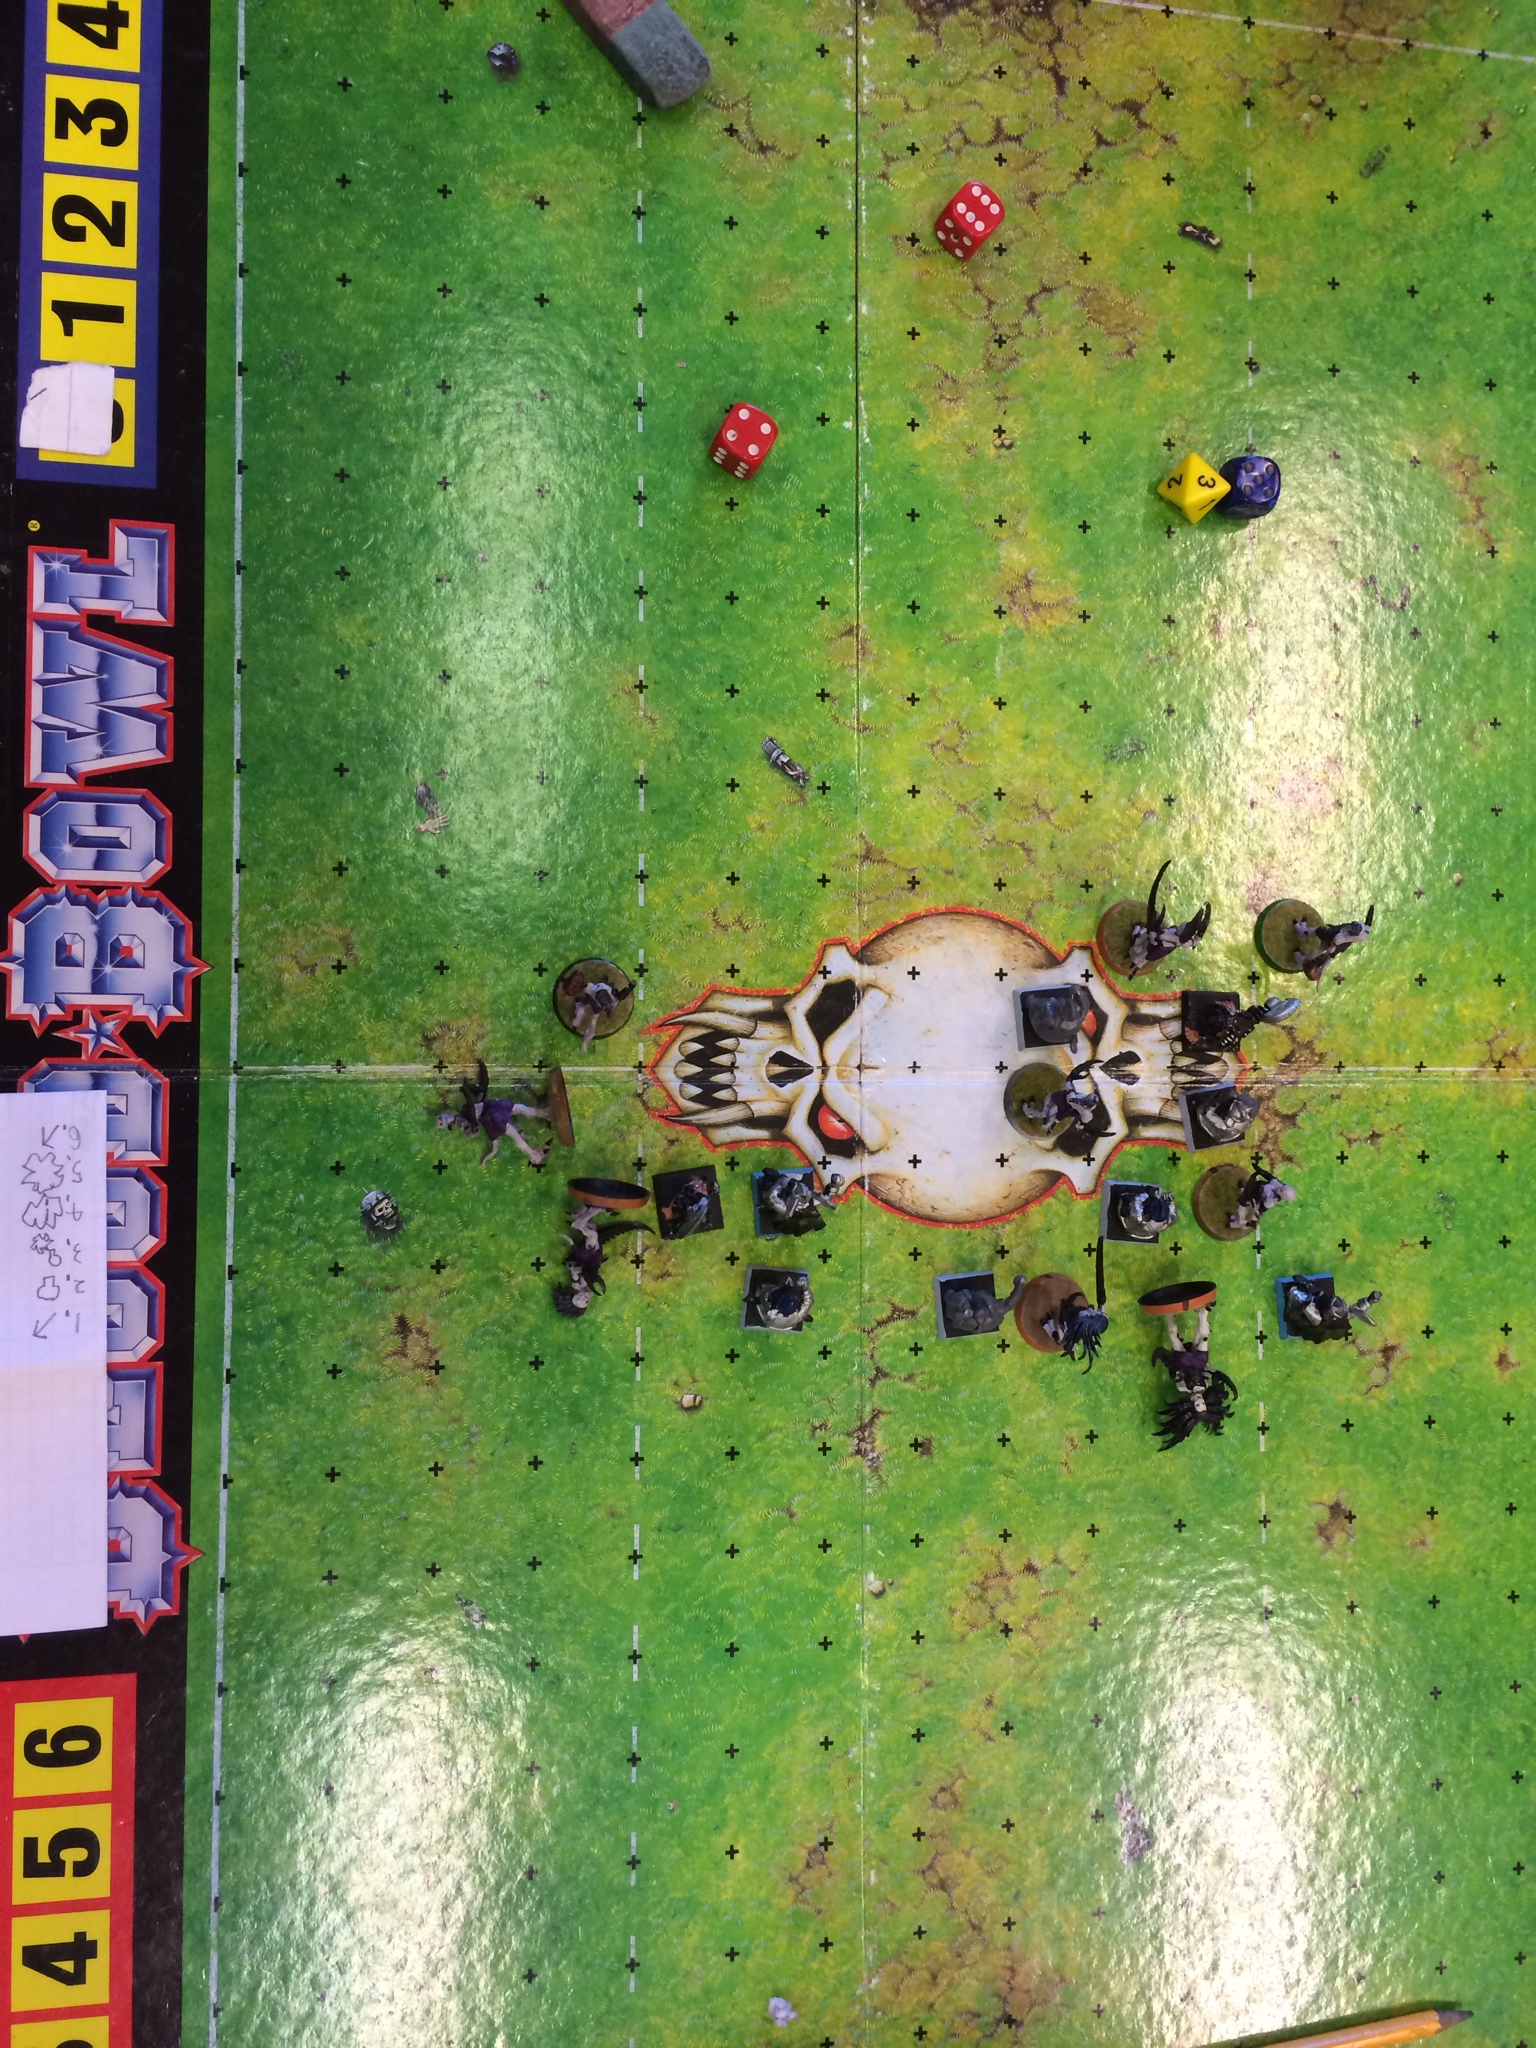 A game of Bloodbowl